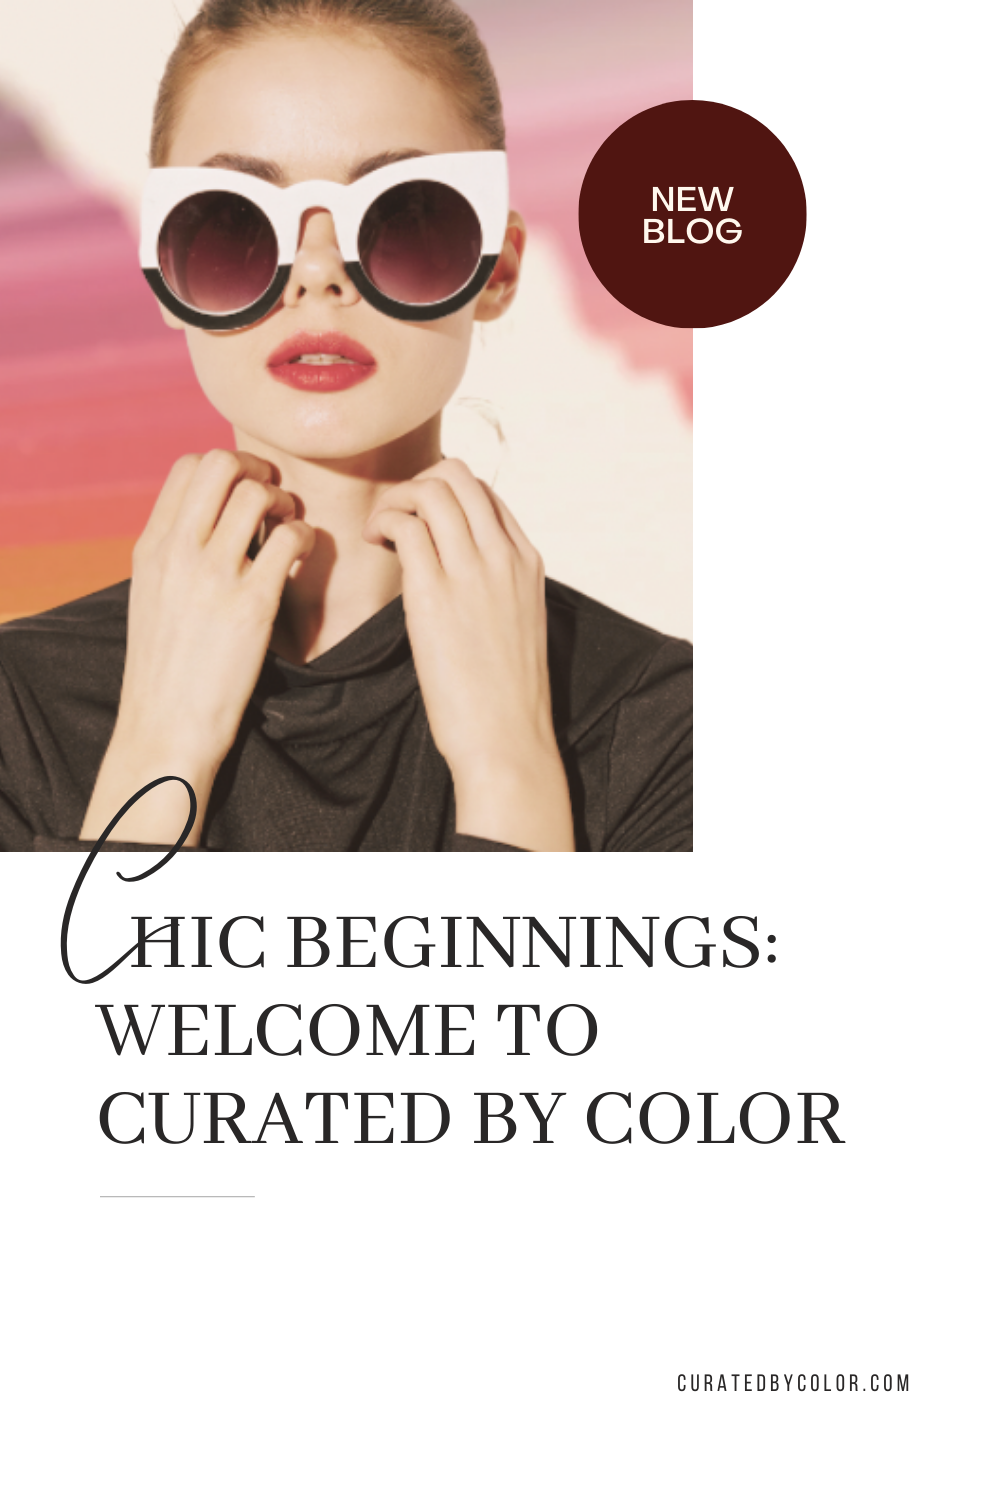 Chic Beginnings: Welcome to Curated by Color